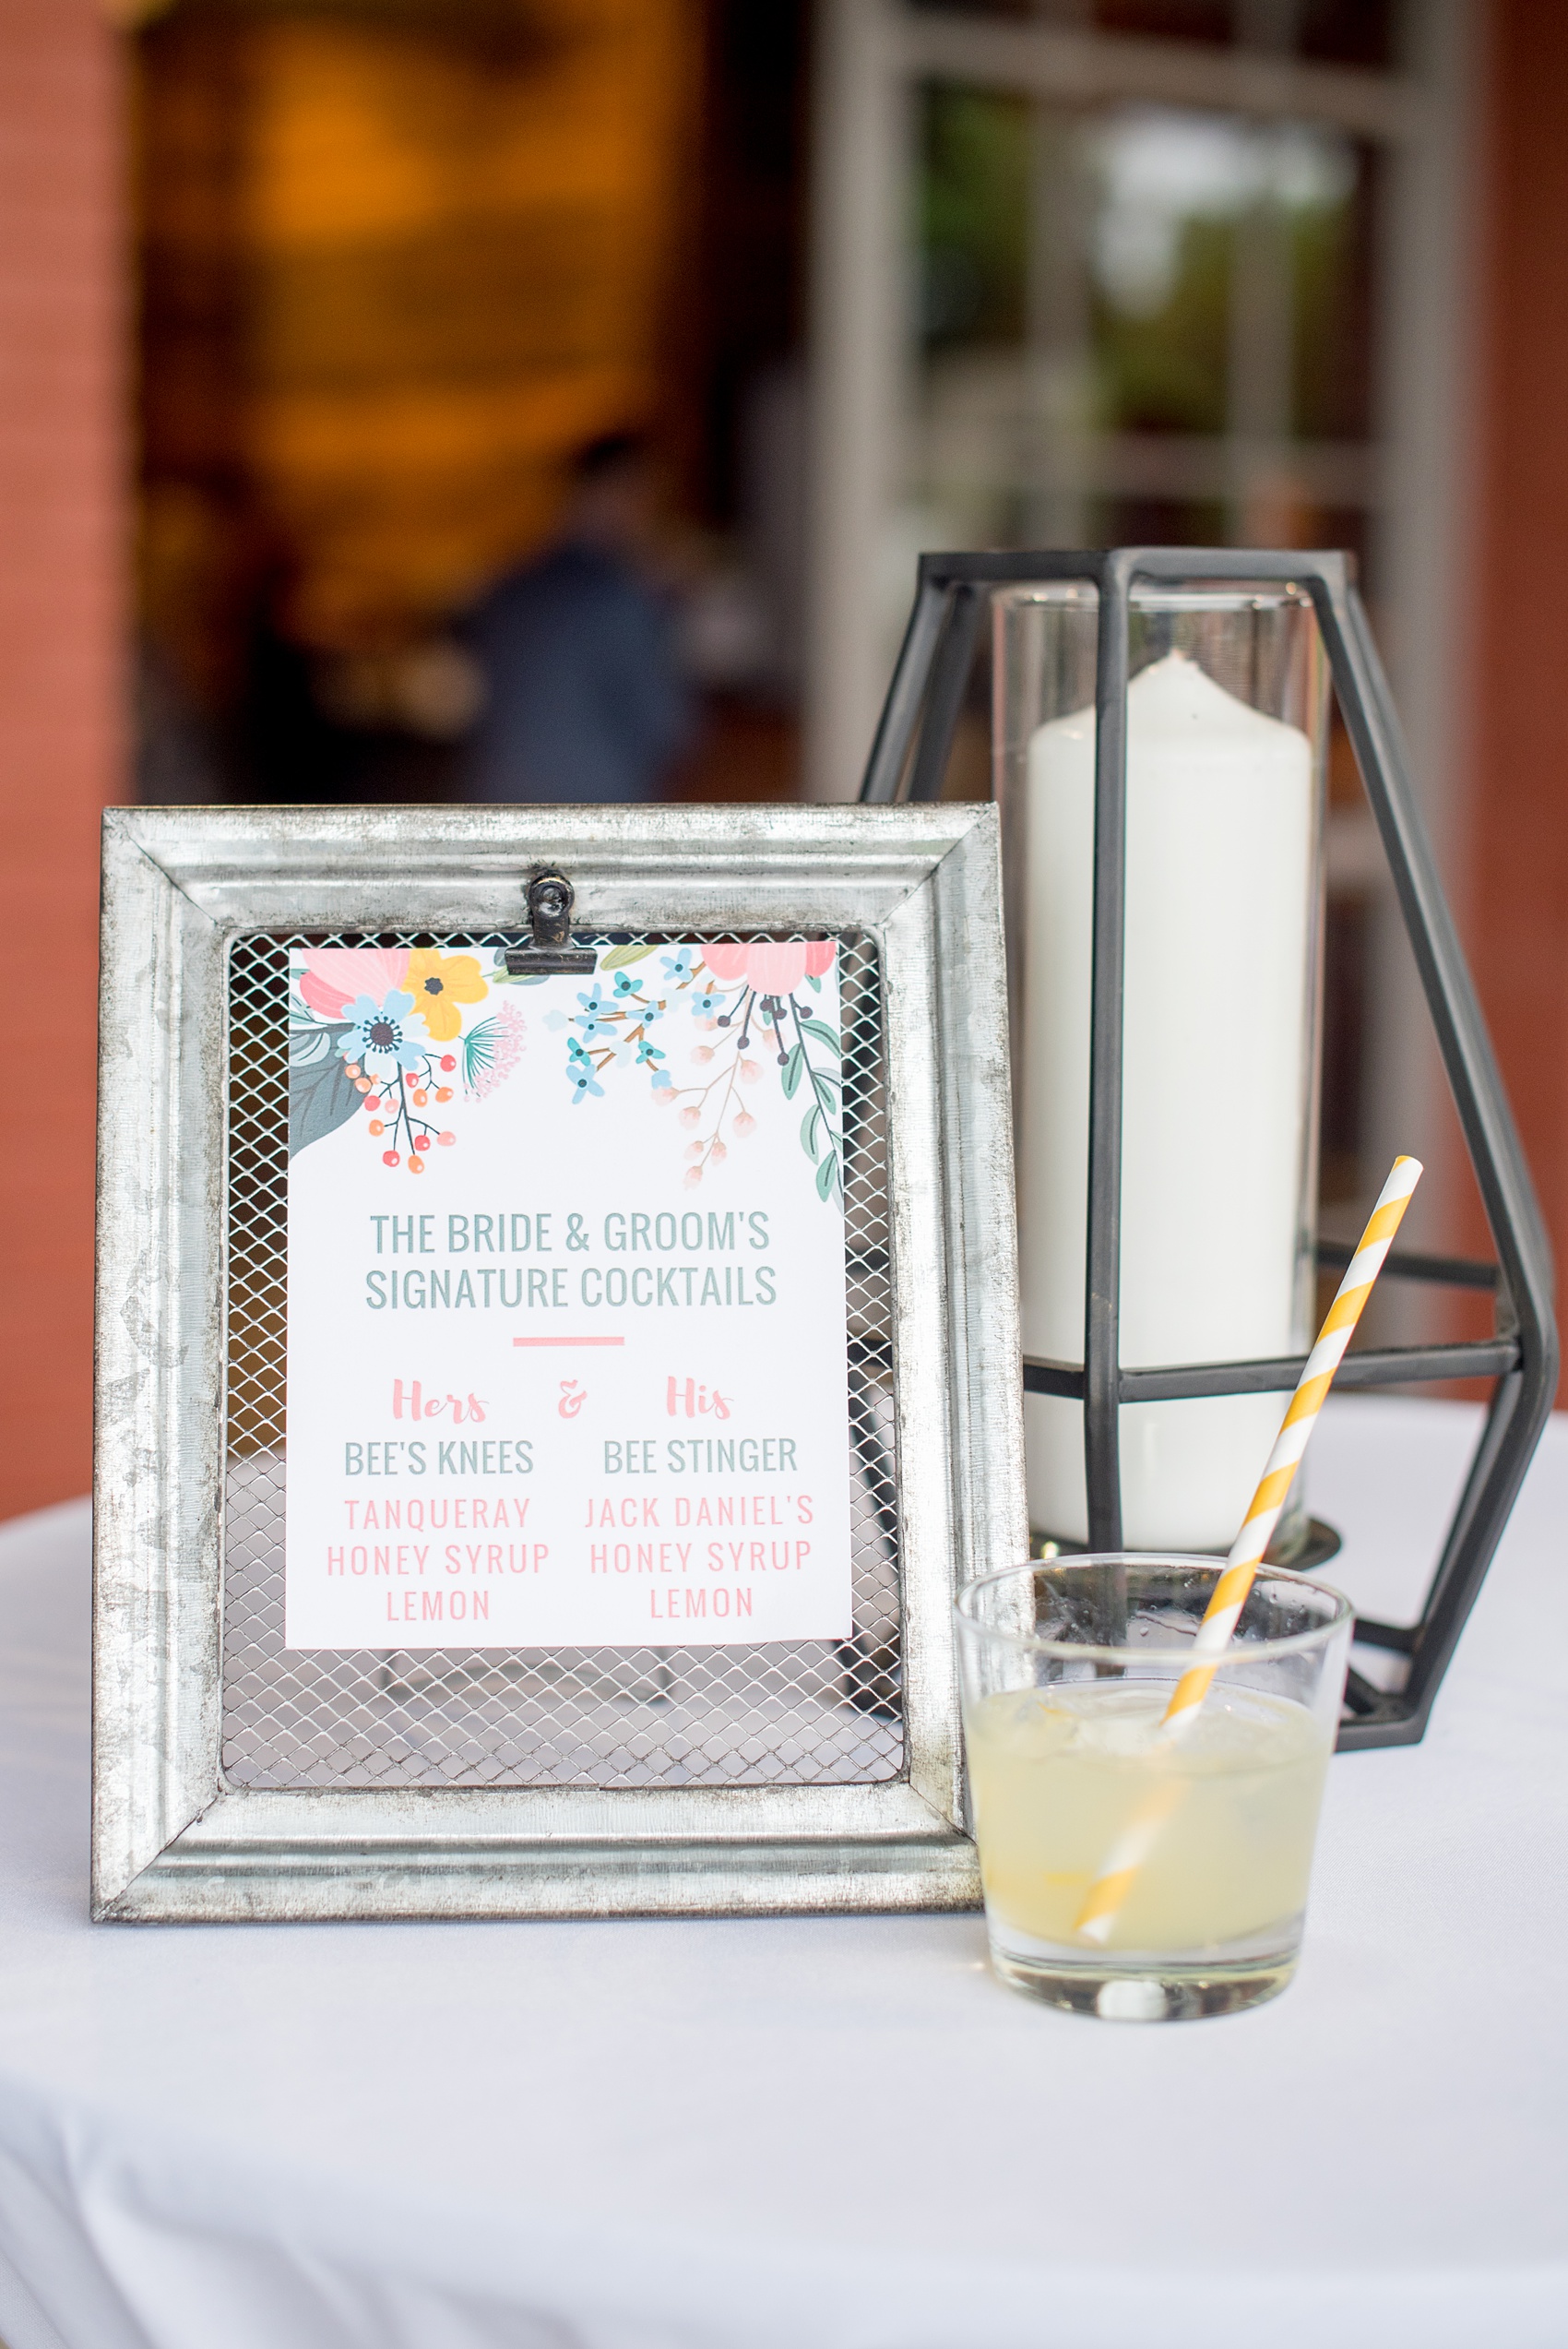 Mikkel Paige Photography photos from a wedding at The Rickhouse in Durham, North Carolina. Picture of the signature drink sign during cocktail hour on the outdoor deck.